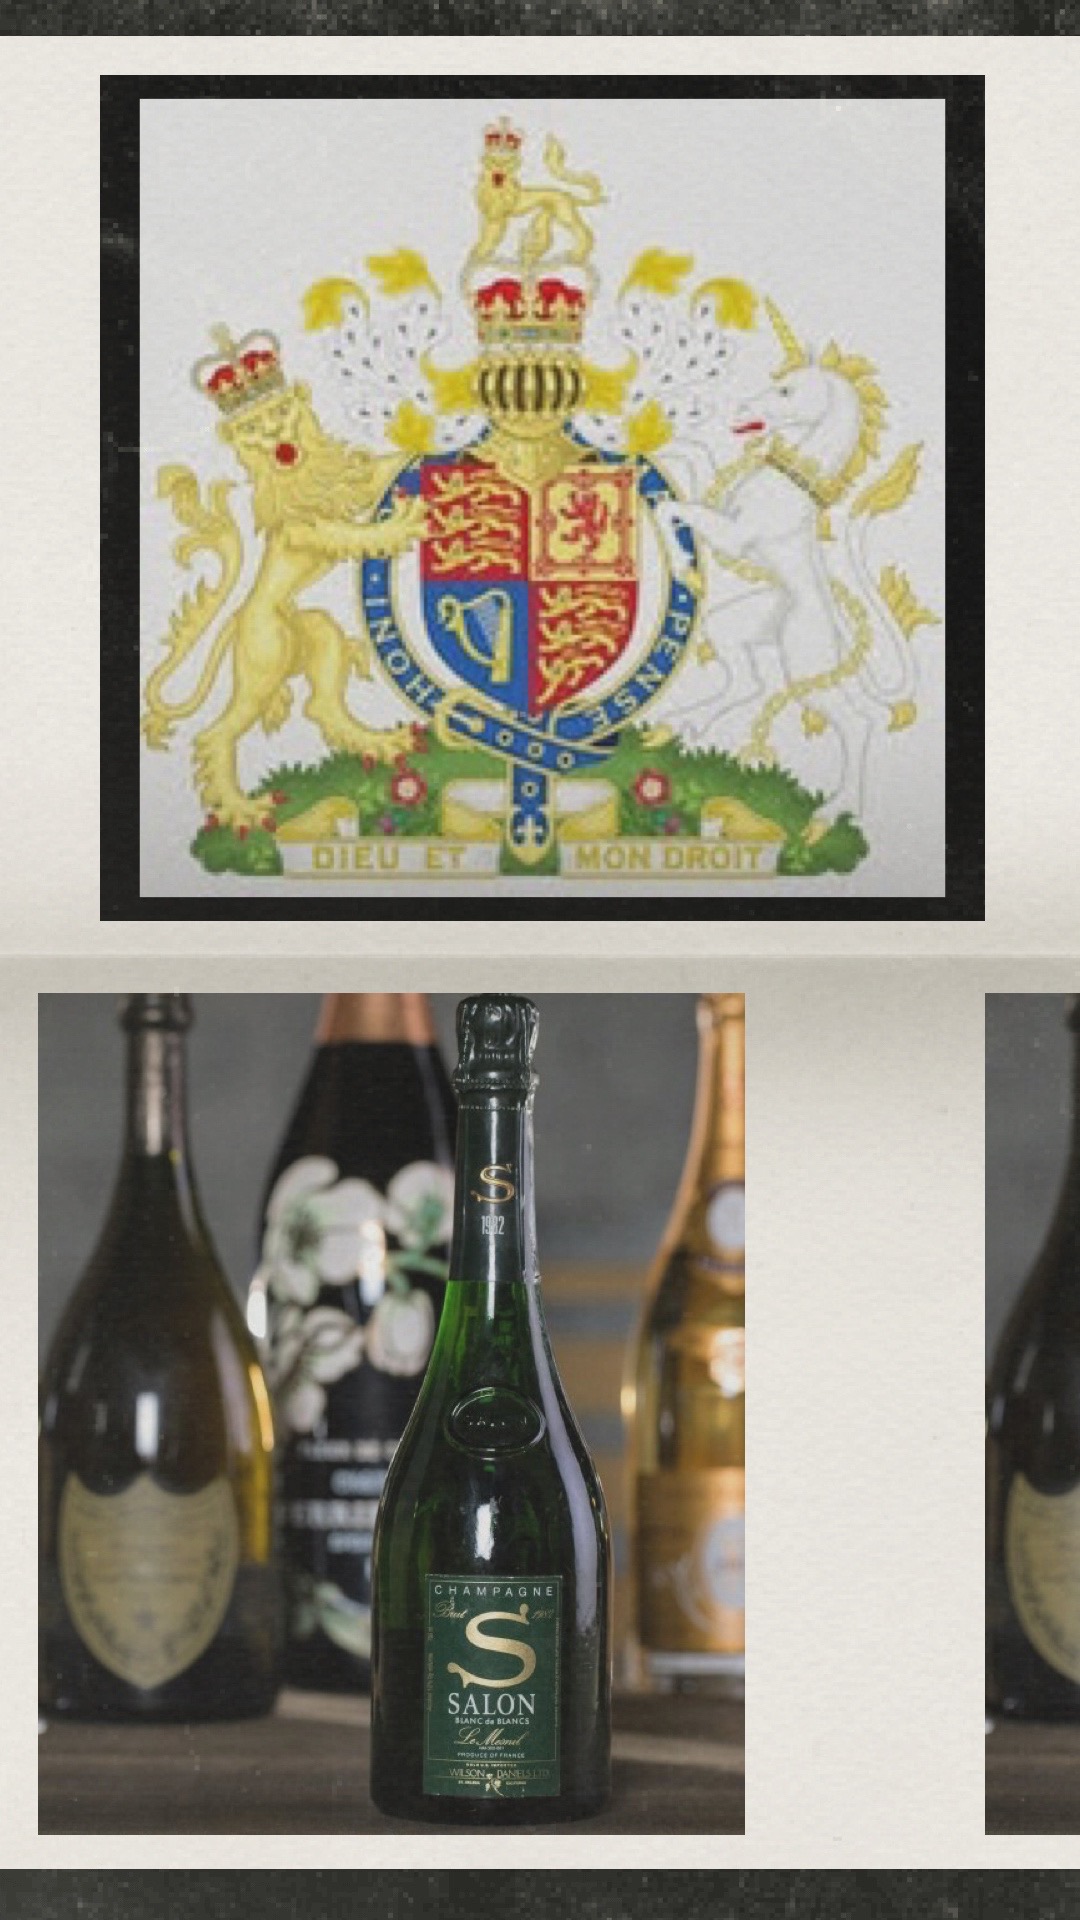 Wine + Spirts “Royal Warrants” become void after Queen’s death